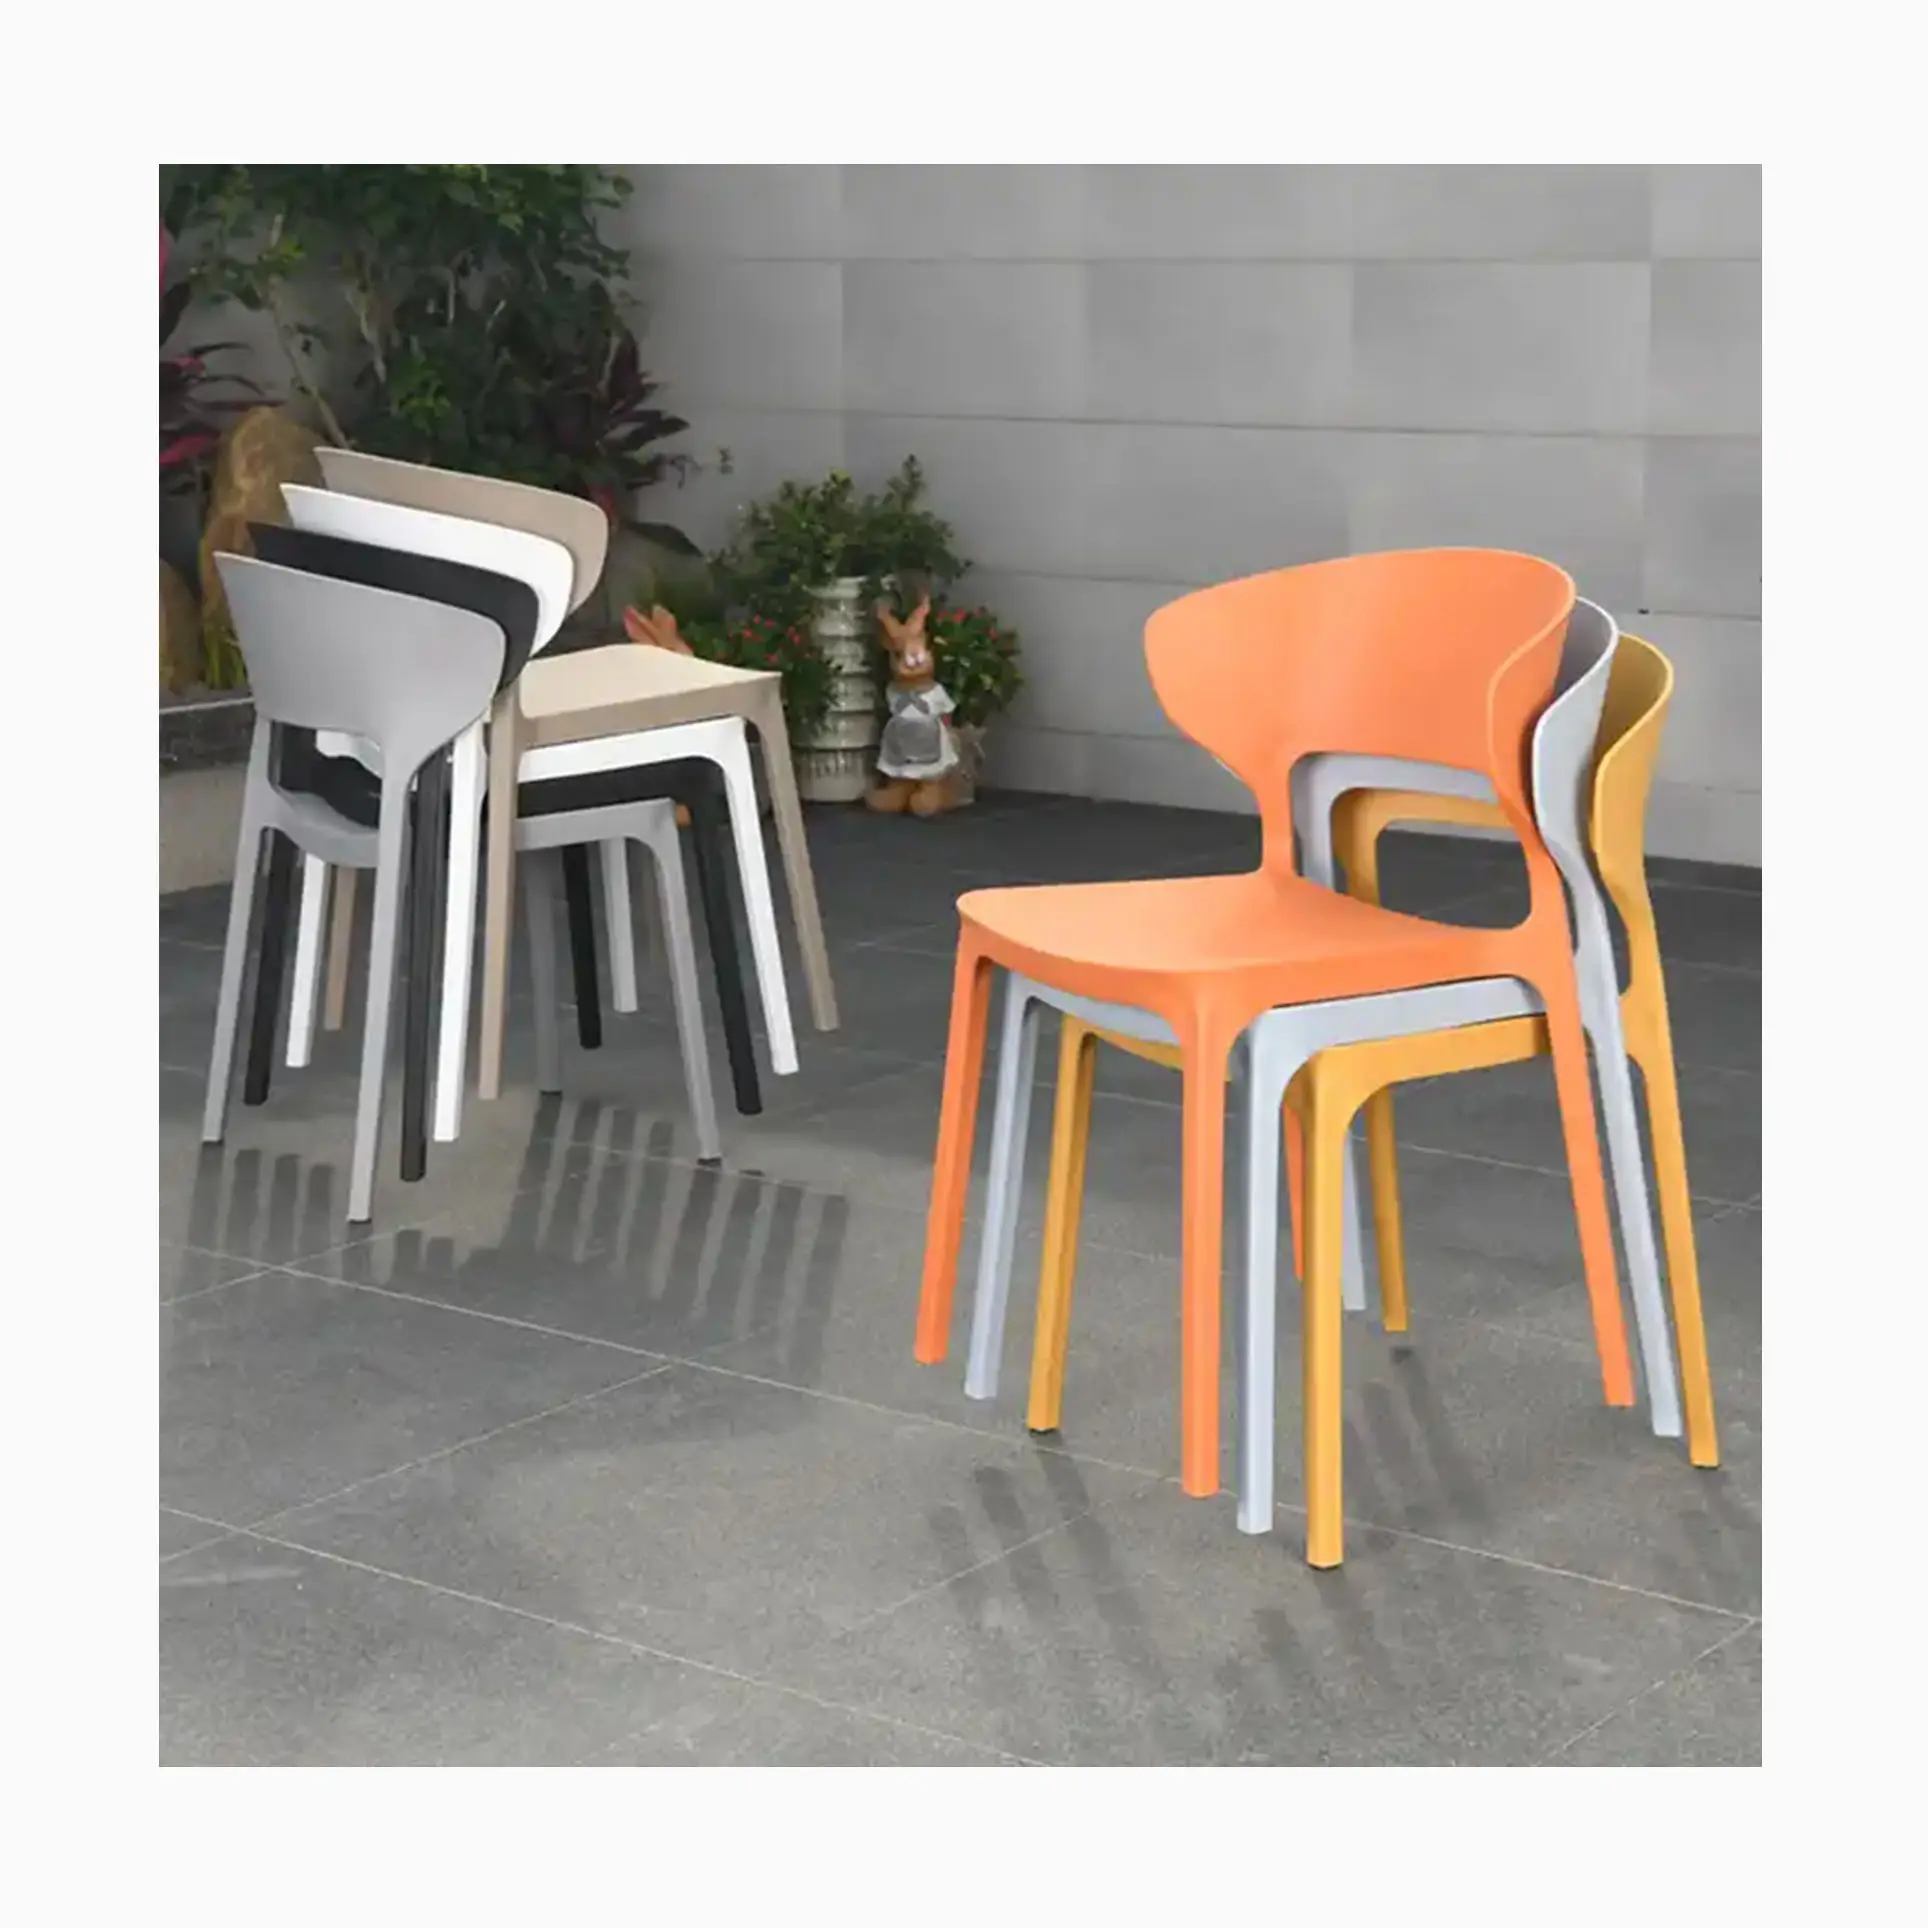 [ZUOAN IMPRESSIVE]Colorful Plastic Stackable Chair Leisure Coffee Shop Chairs Indoor Outdoor Furniture Set